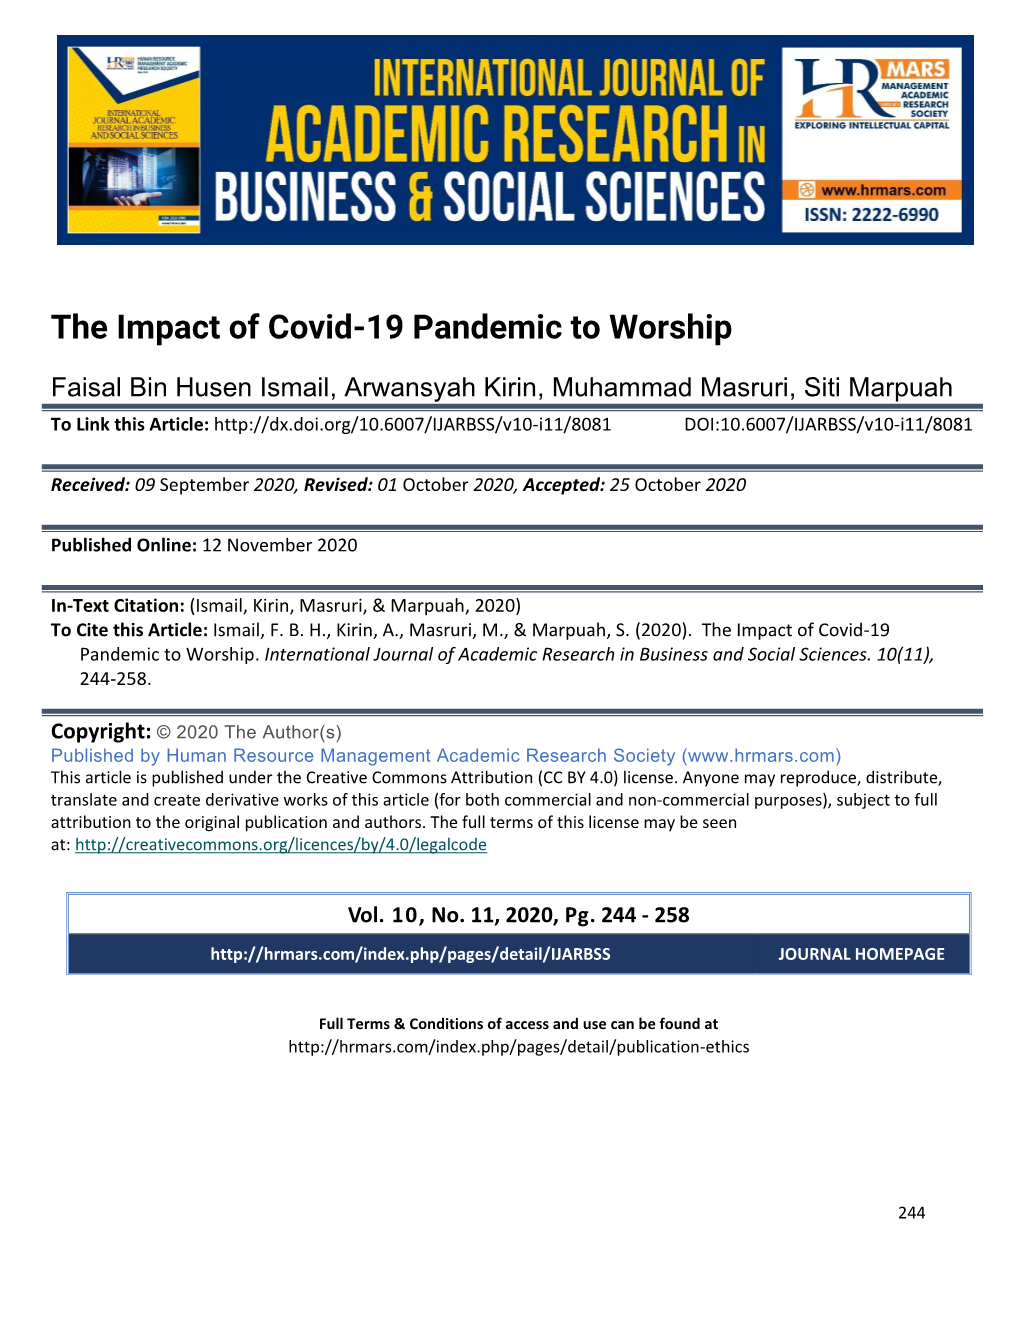 The Impact of Covid-19 Pandemic to Worship